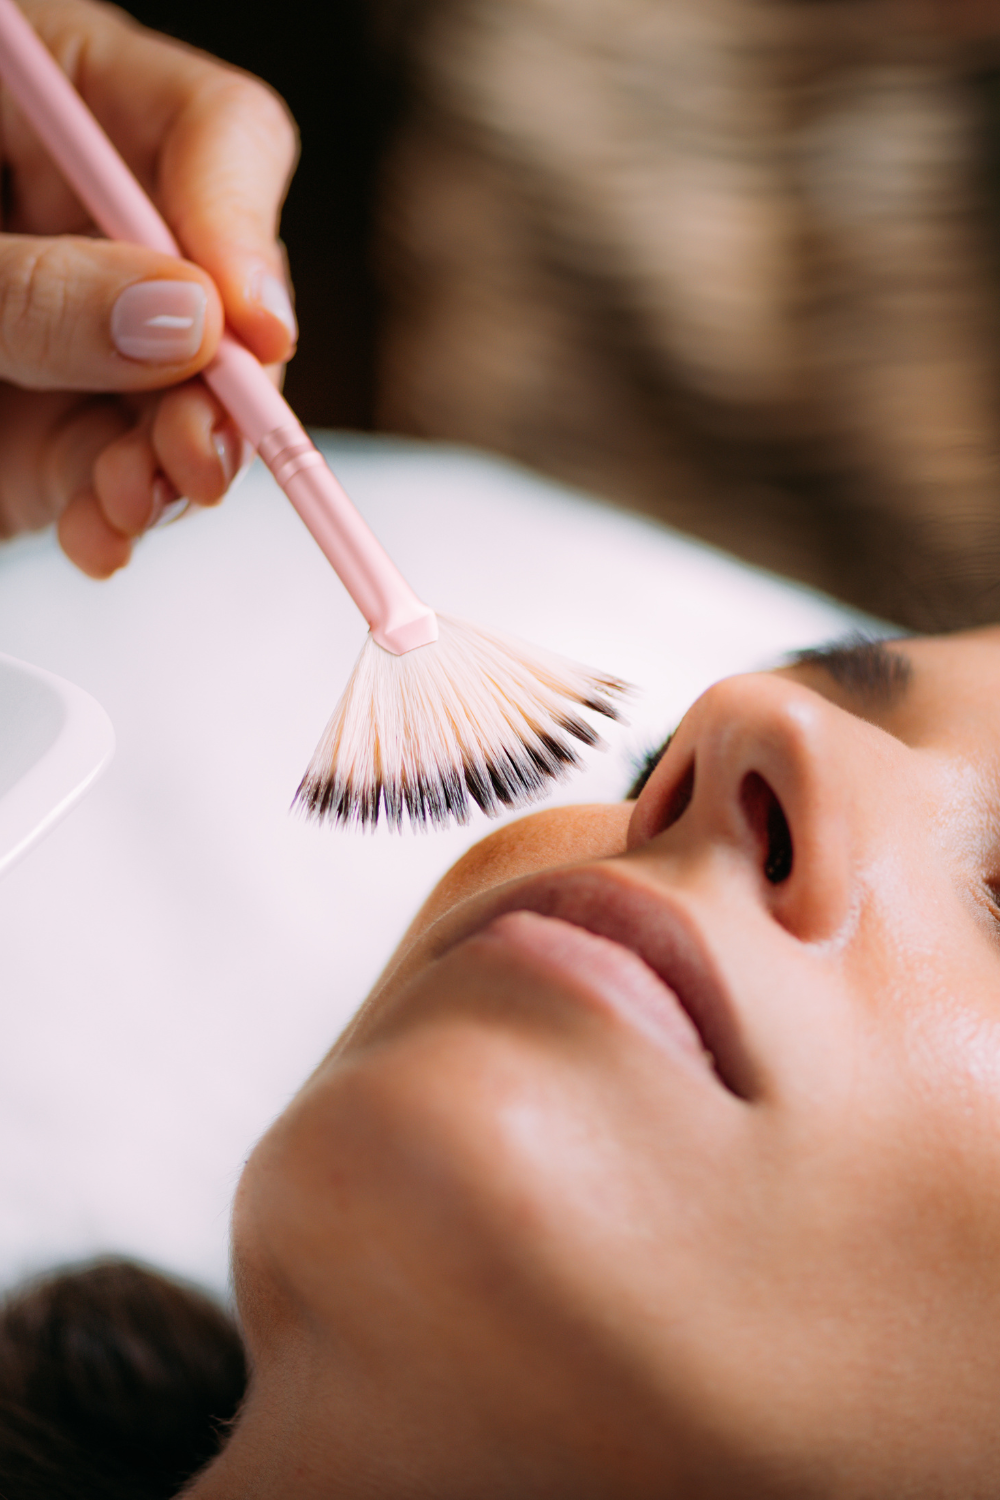 Transform Your Skin with Chemical Peels: Here’s How